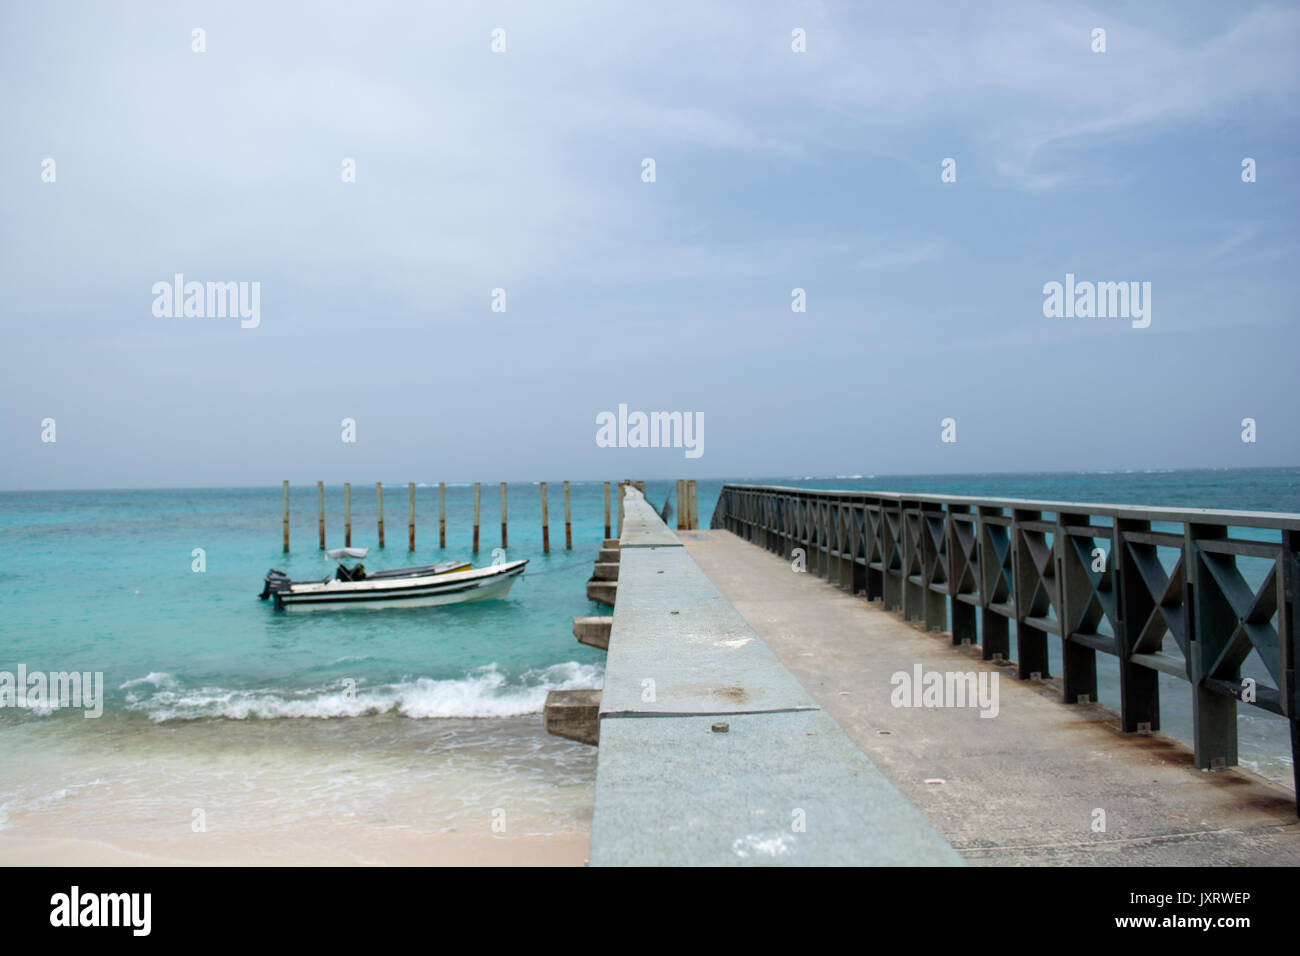 Tropical resort destination dock pier with little boats. Stock Photo